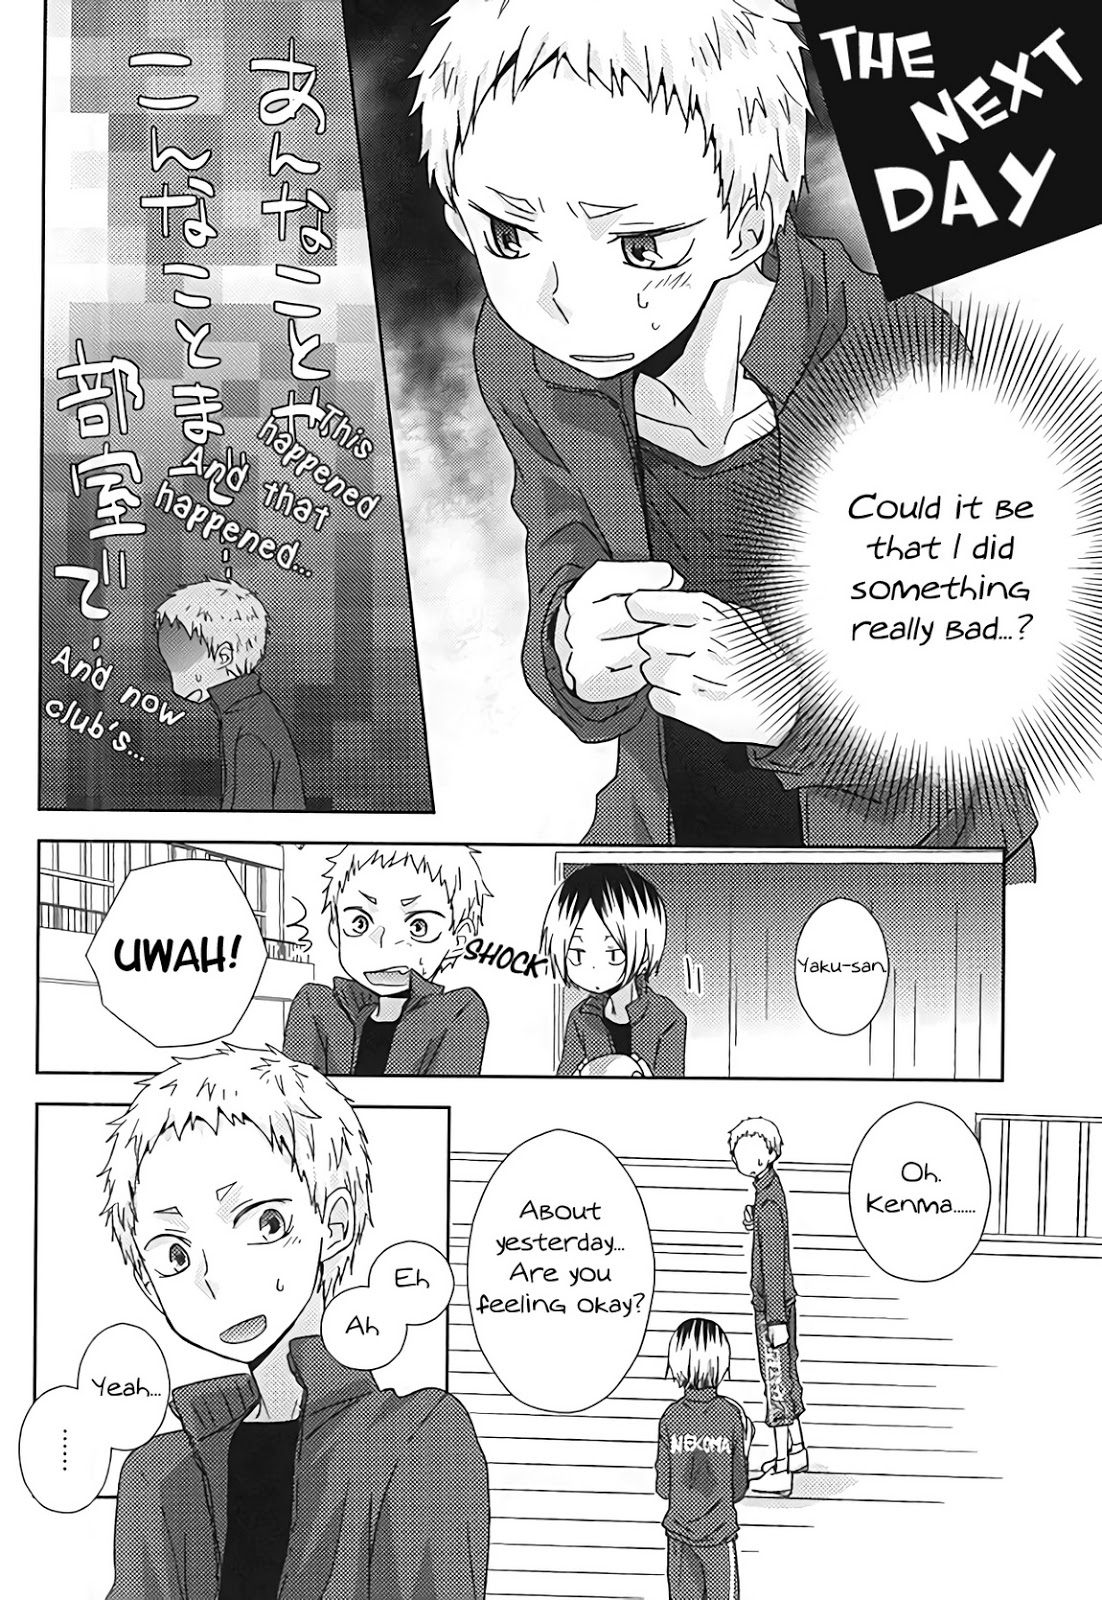 (SPARK10) [MOBRIS (Tomoharu)] HOWtoPLAY tutrial (Haikyuu!!) [English] [Homies over Hoes] page 33 full